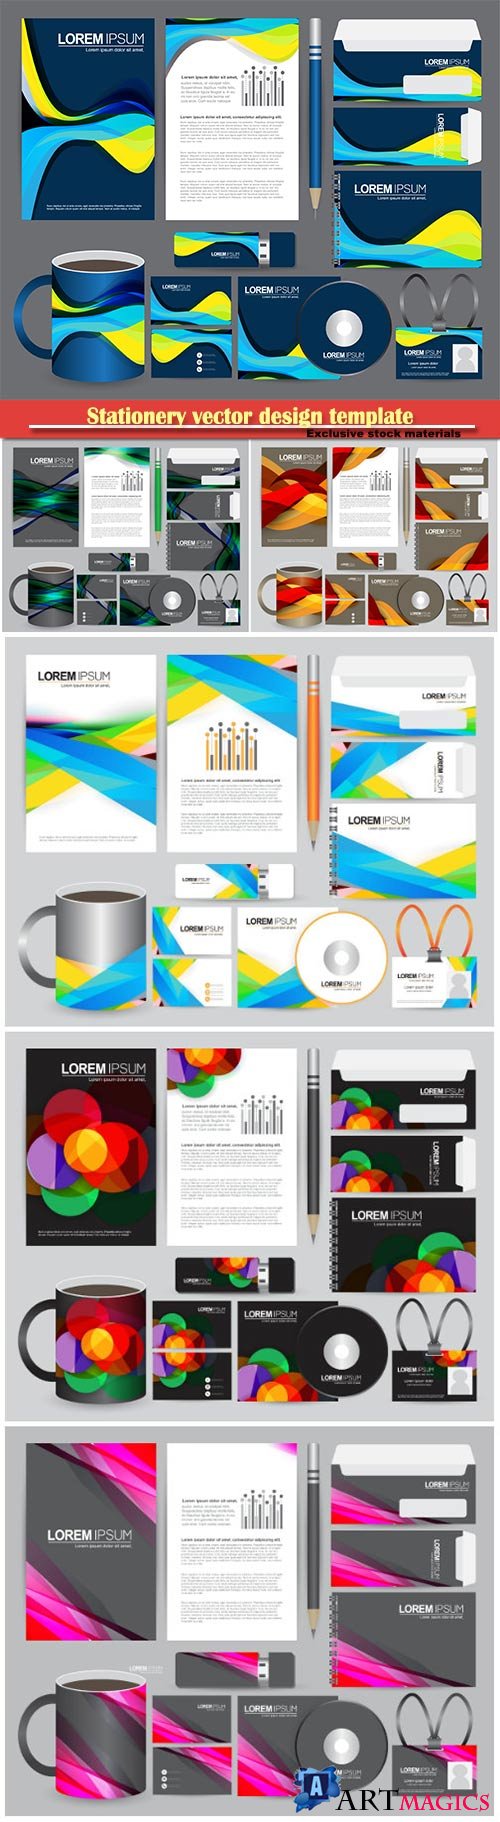 Stationery vector design template